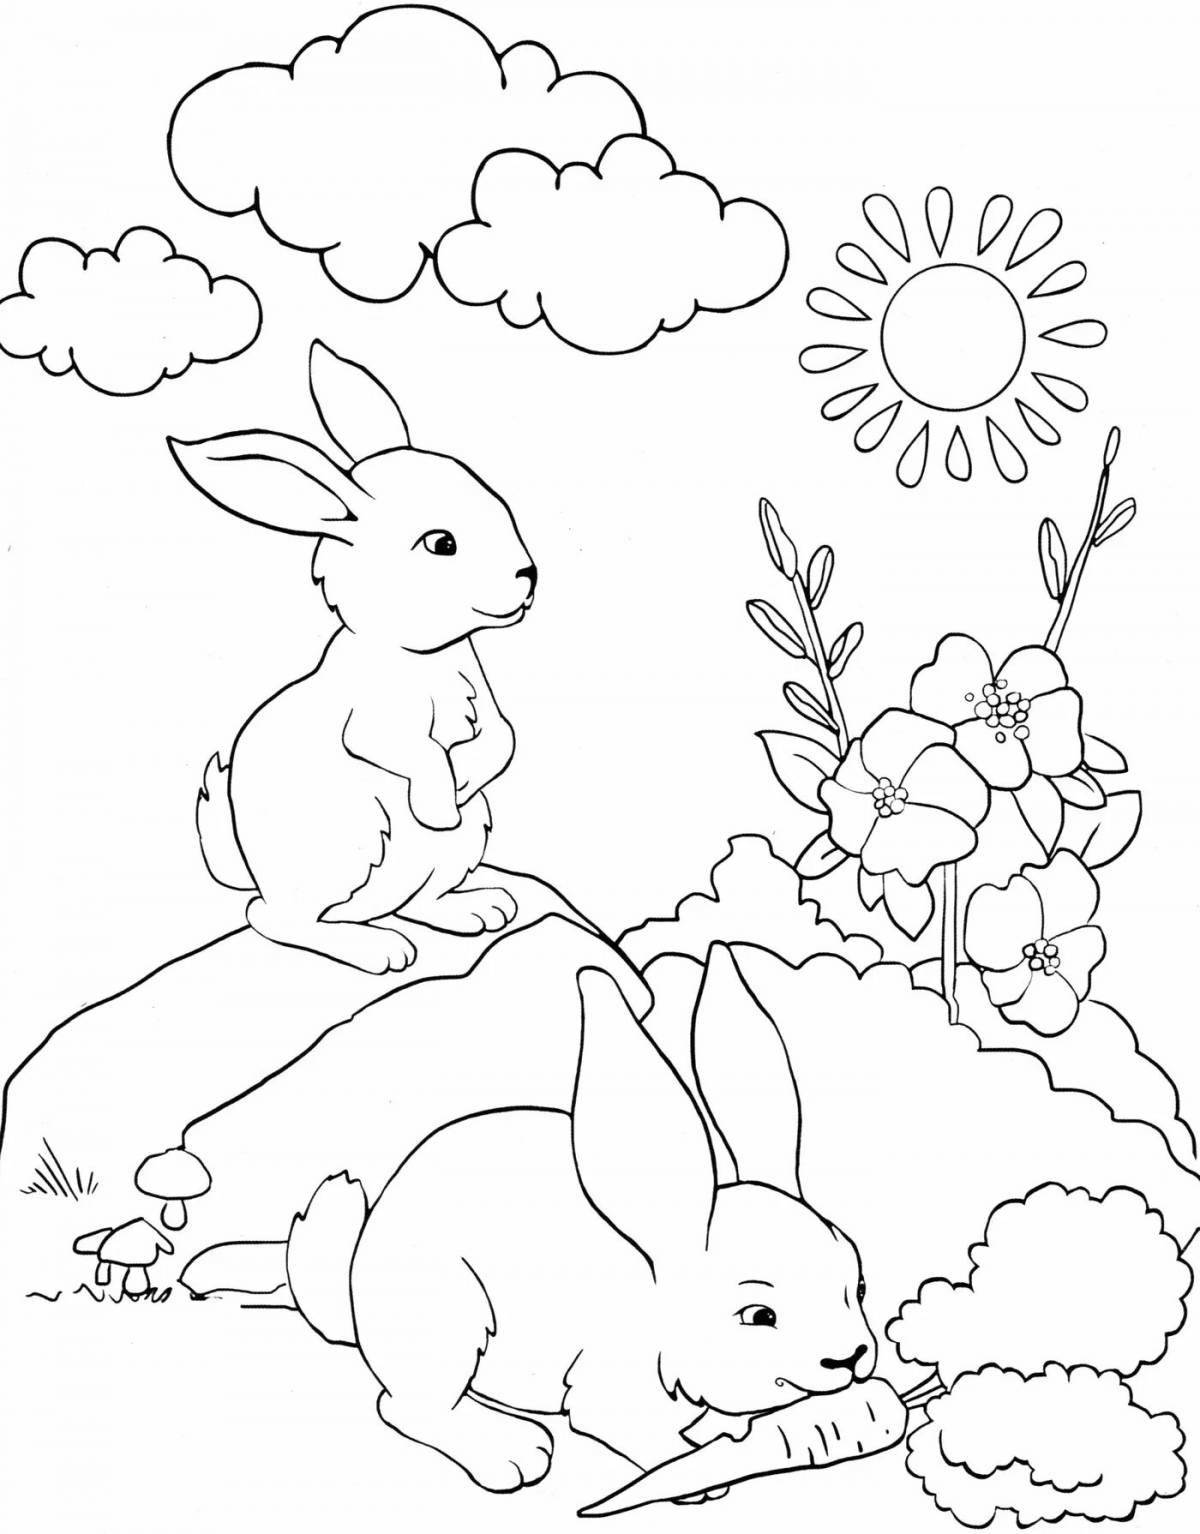 Smiling bunny coloring book for kids